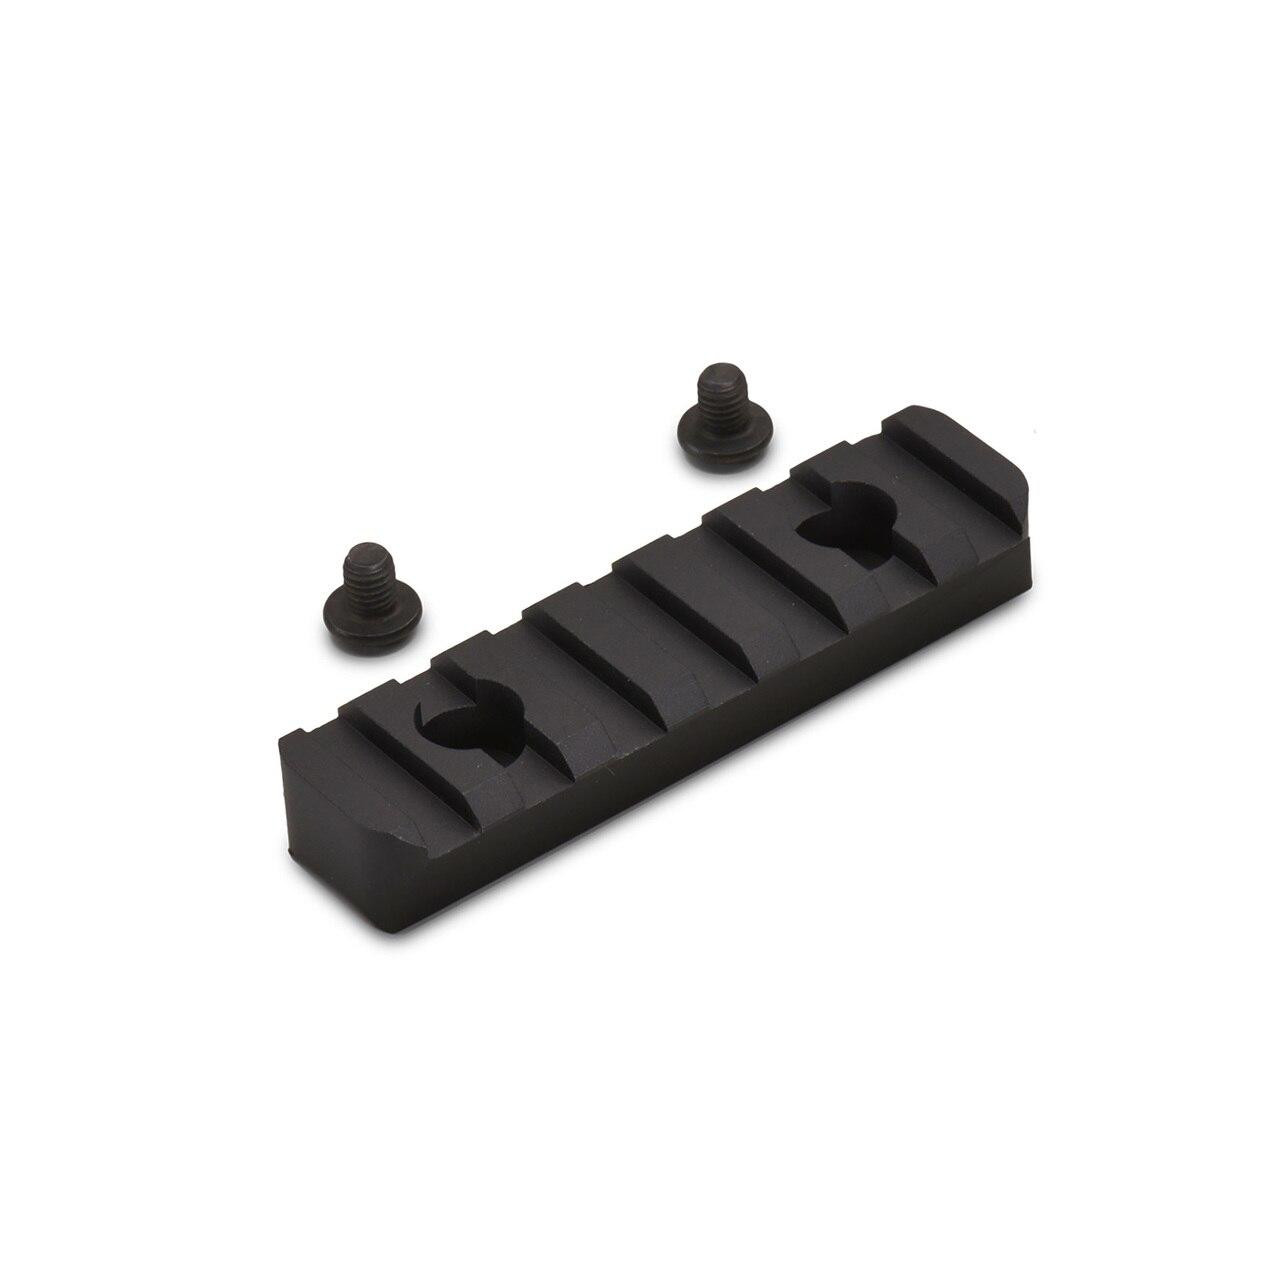 Nordic Components Nordic 3.35 Pic Rail For Nc1/nc2 816696020280